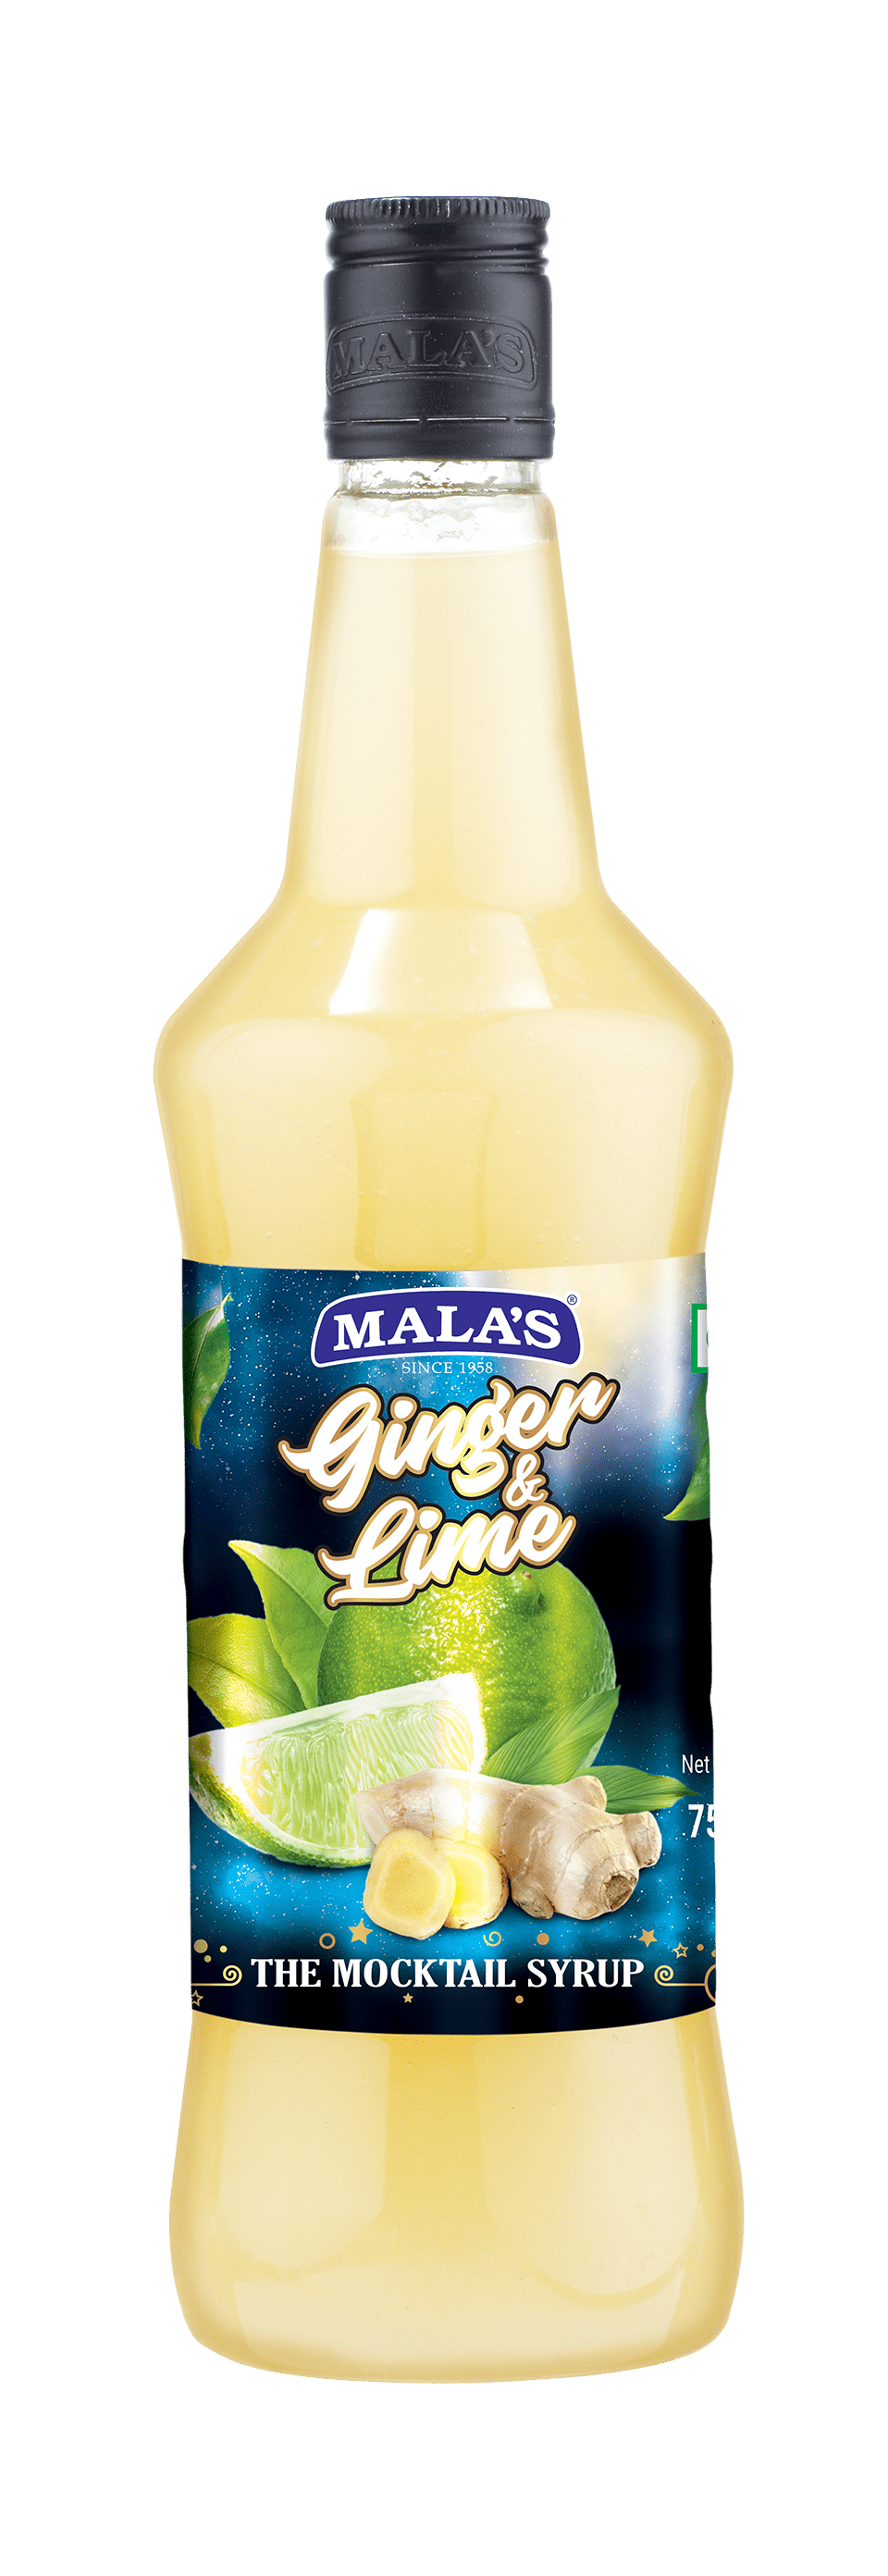 Mala's Ginger & Lime Cordial Syrup 750 ml for Mocktail & Cocktail MOCKTAIL Mala's